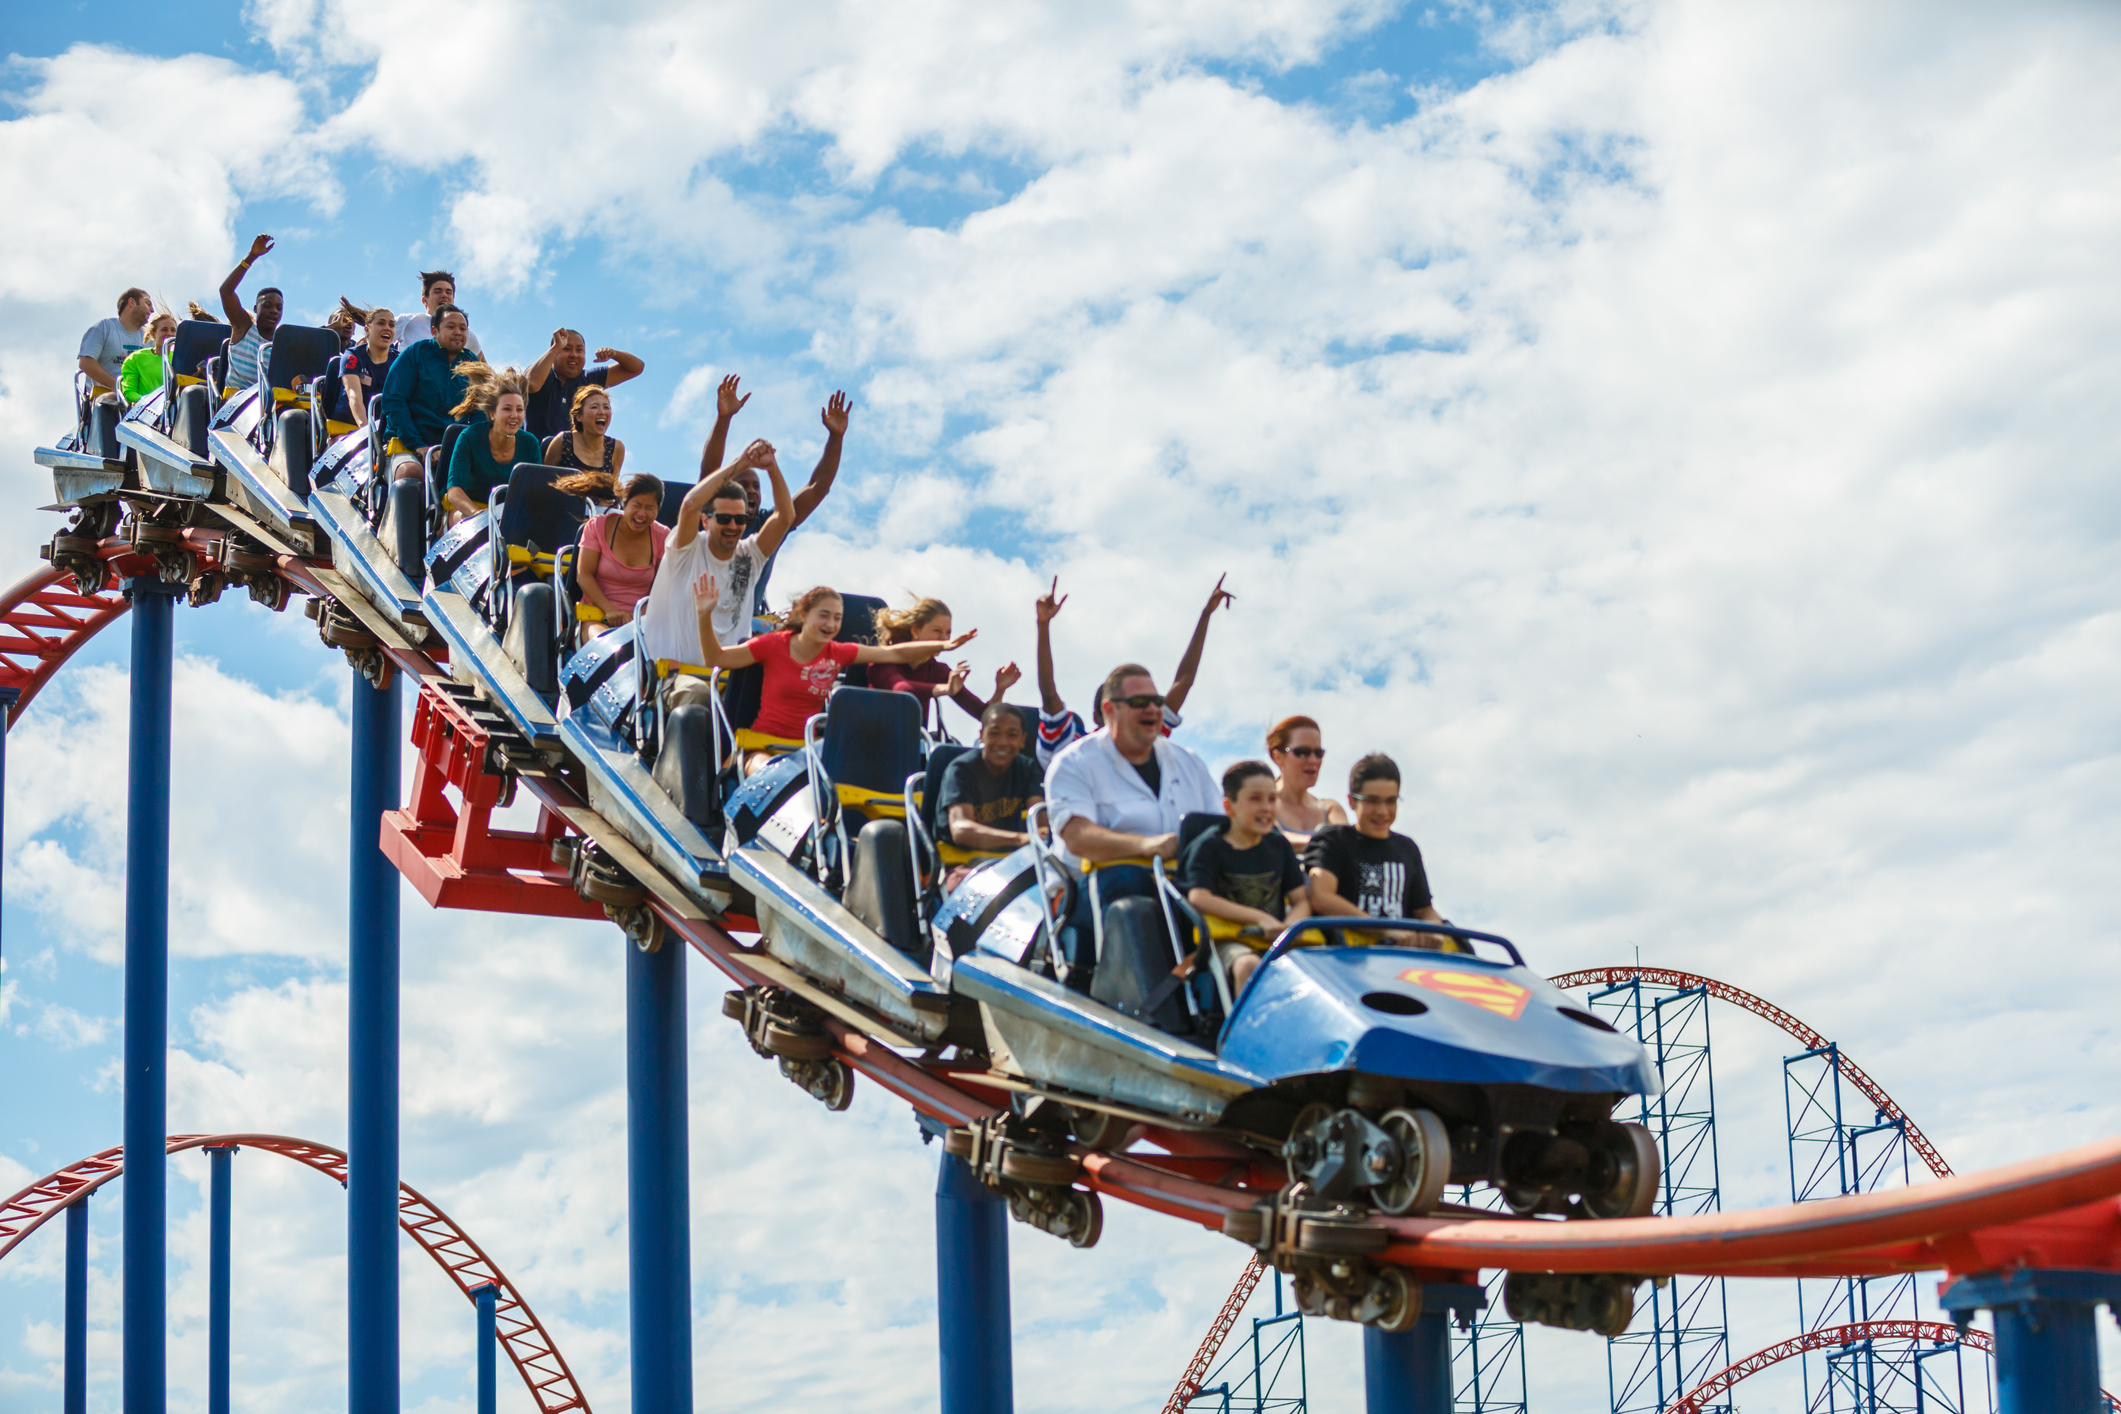 Six Flags discounts: Save up to 50% on tickets! - Clark Deals